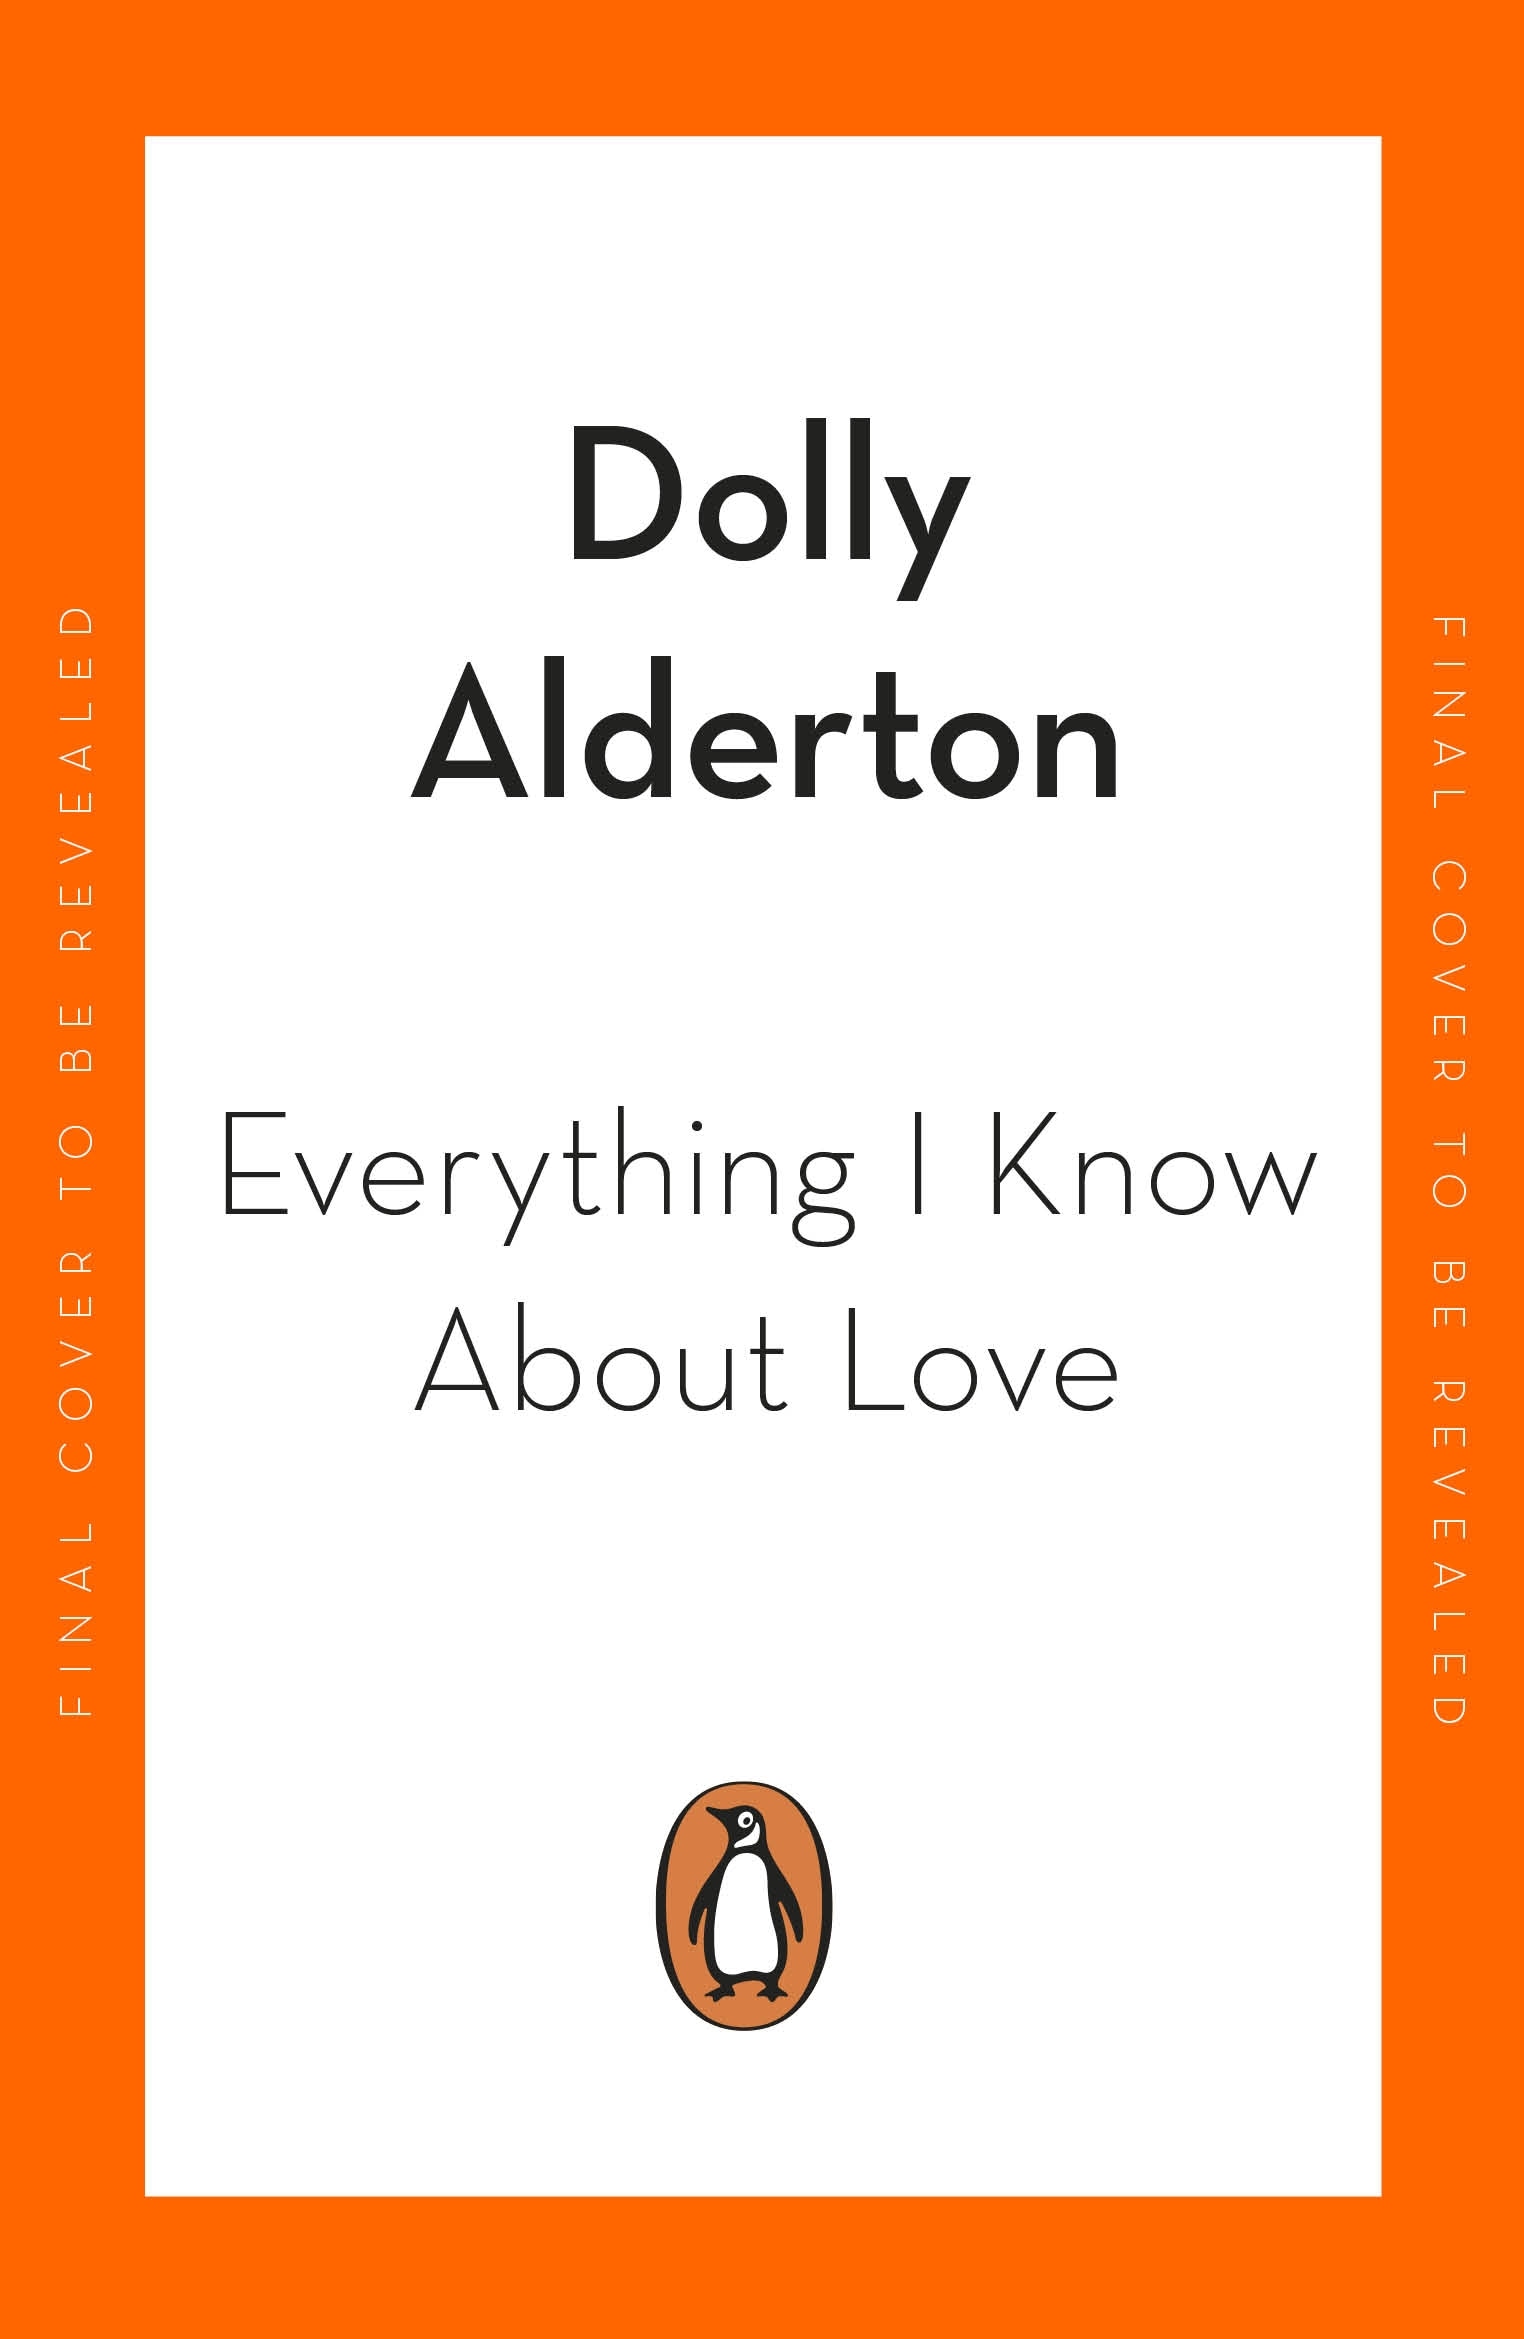 Book “Everything I Know About Love” by Dolly Alderton — July 7, 2022